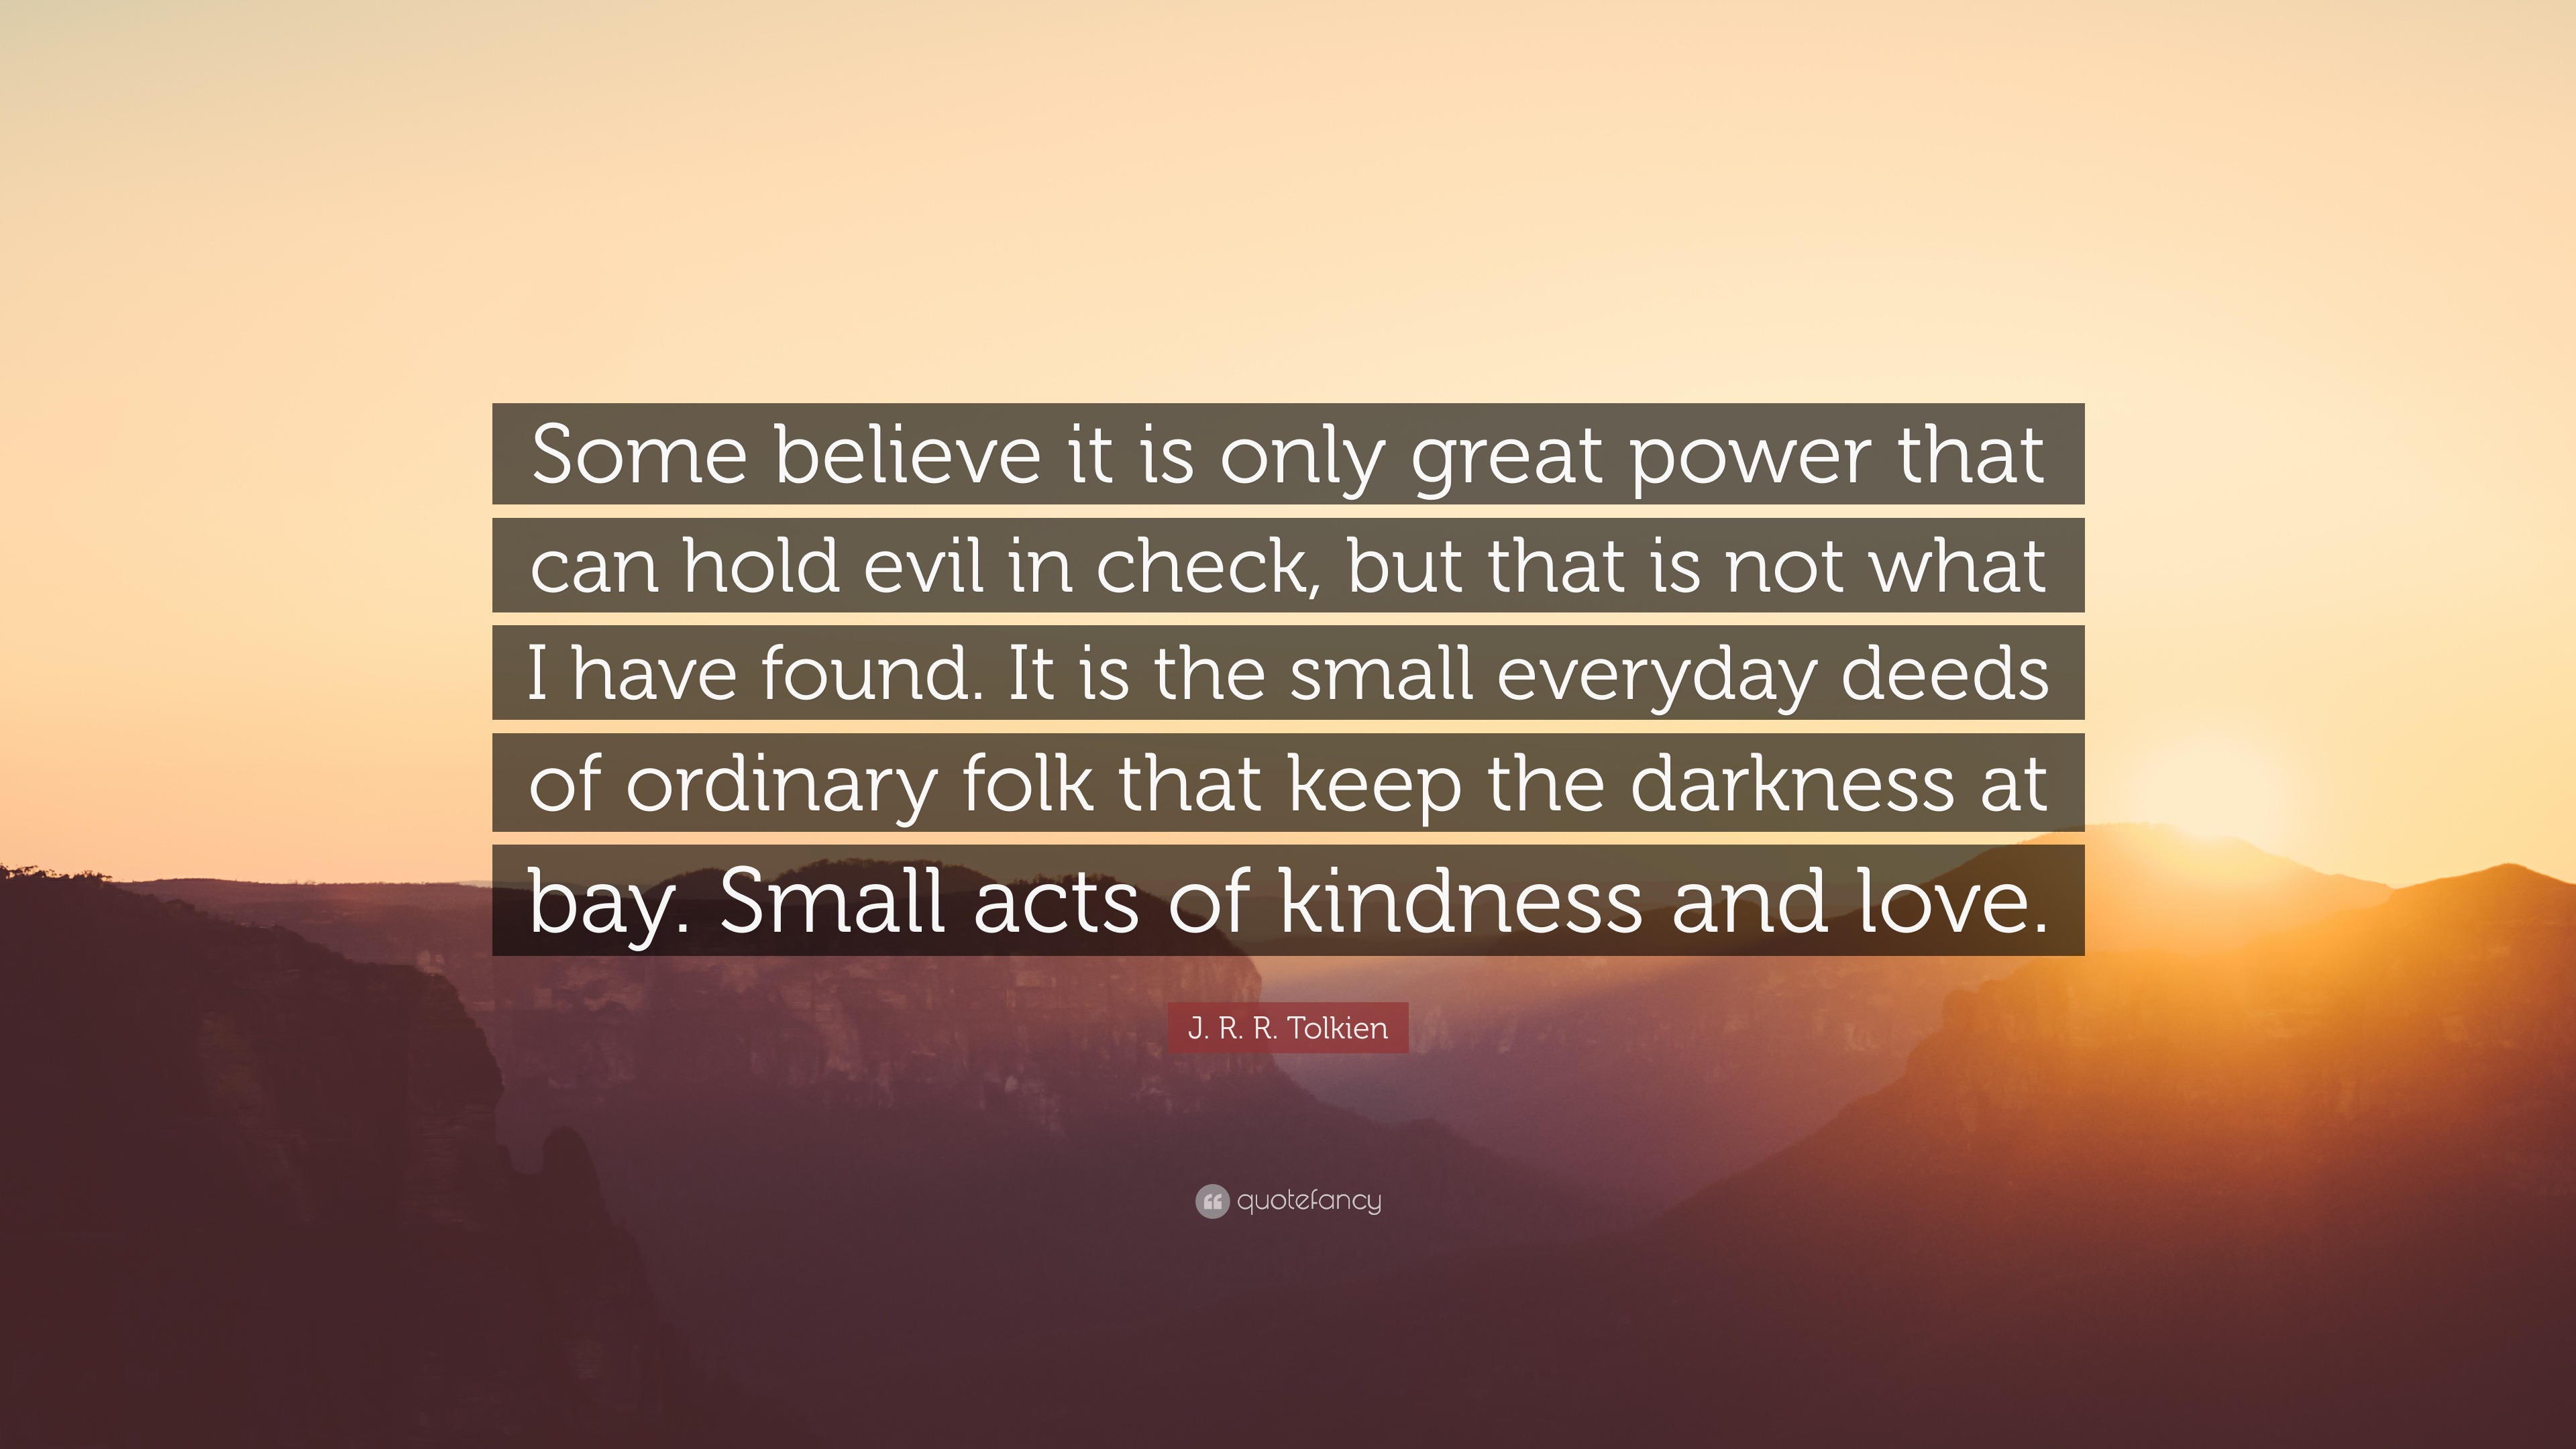 J. R. R. Tolkien Quote: “Some believe it is only great power that can